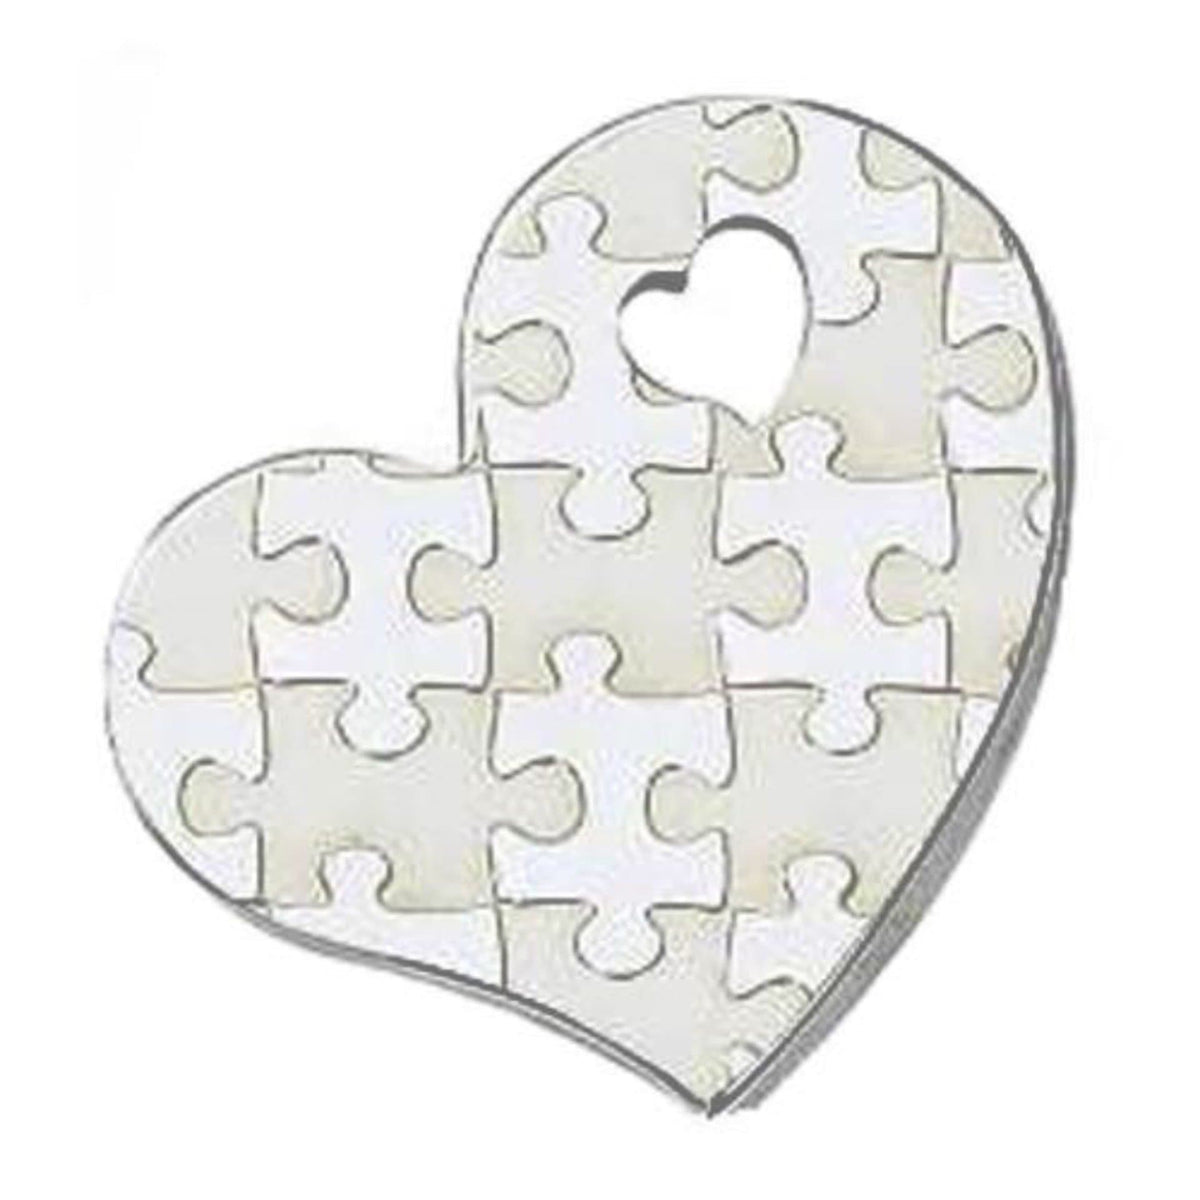 Autism Awareness Puzzle-Design Heart Shape Stainless Steel Pendant - The House of Awareness